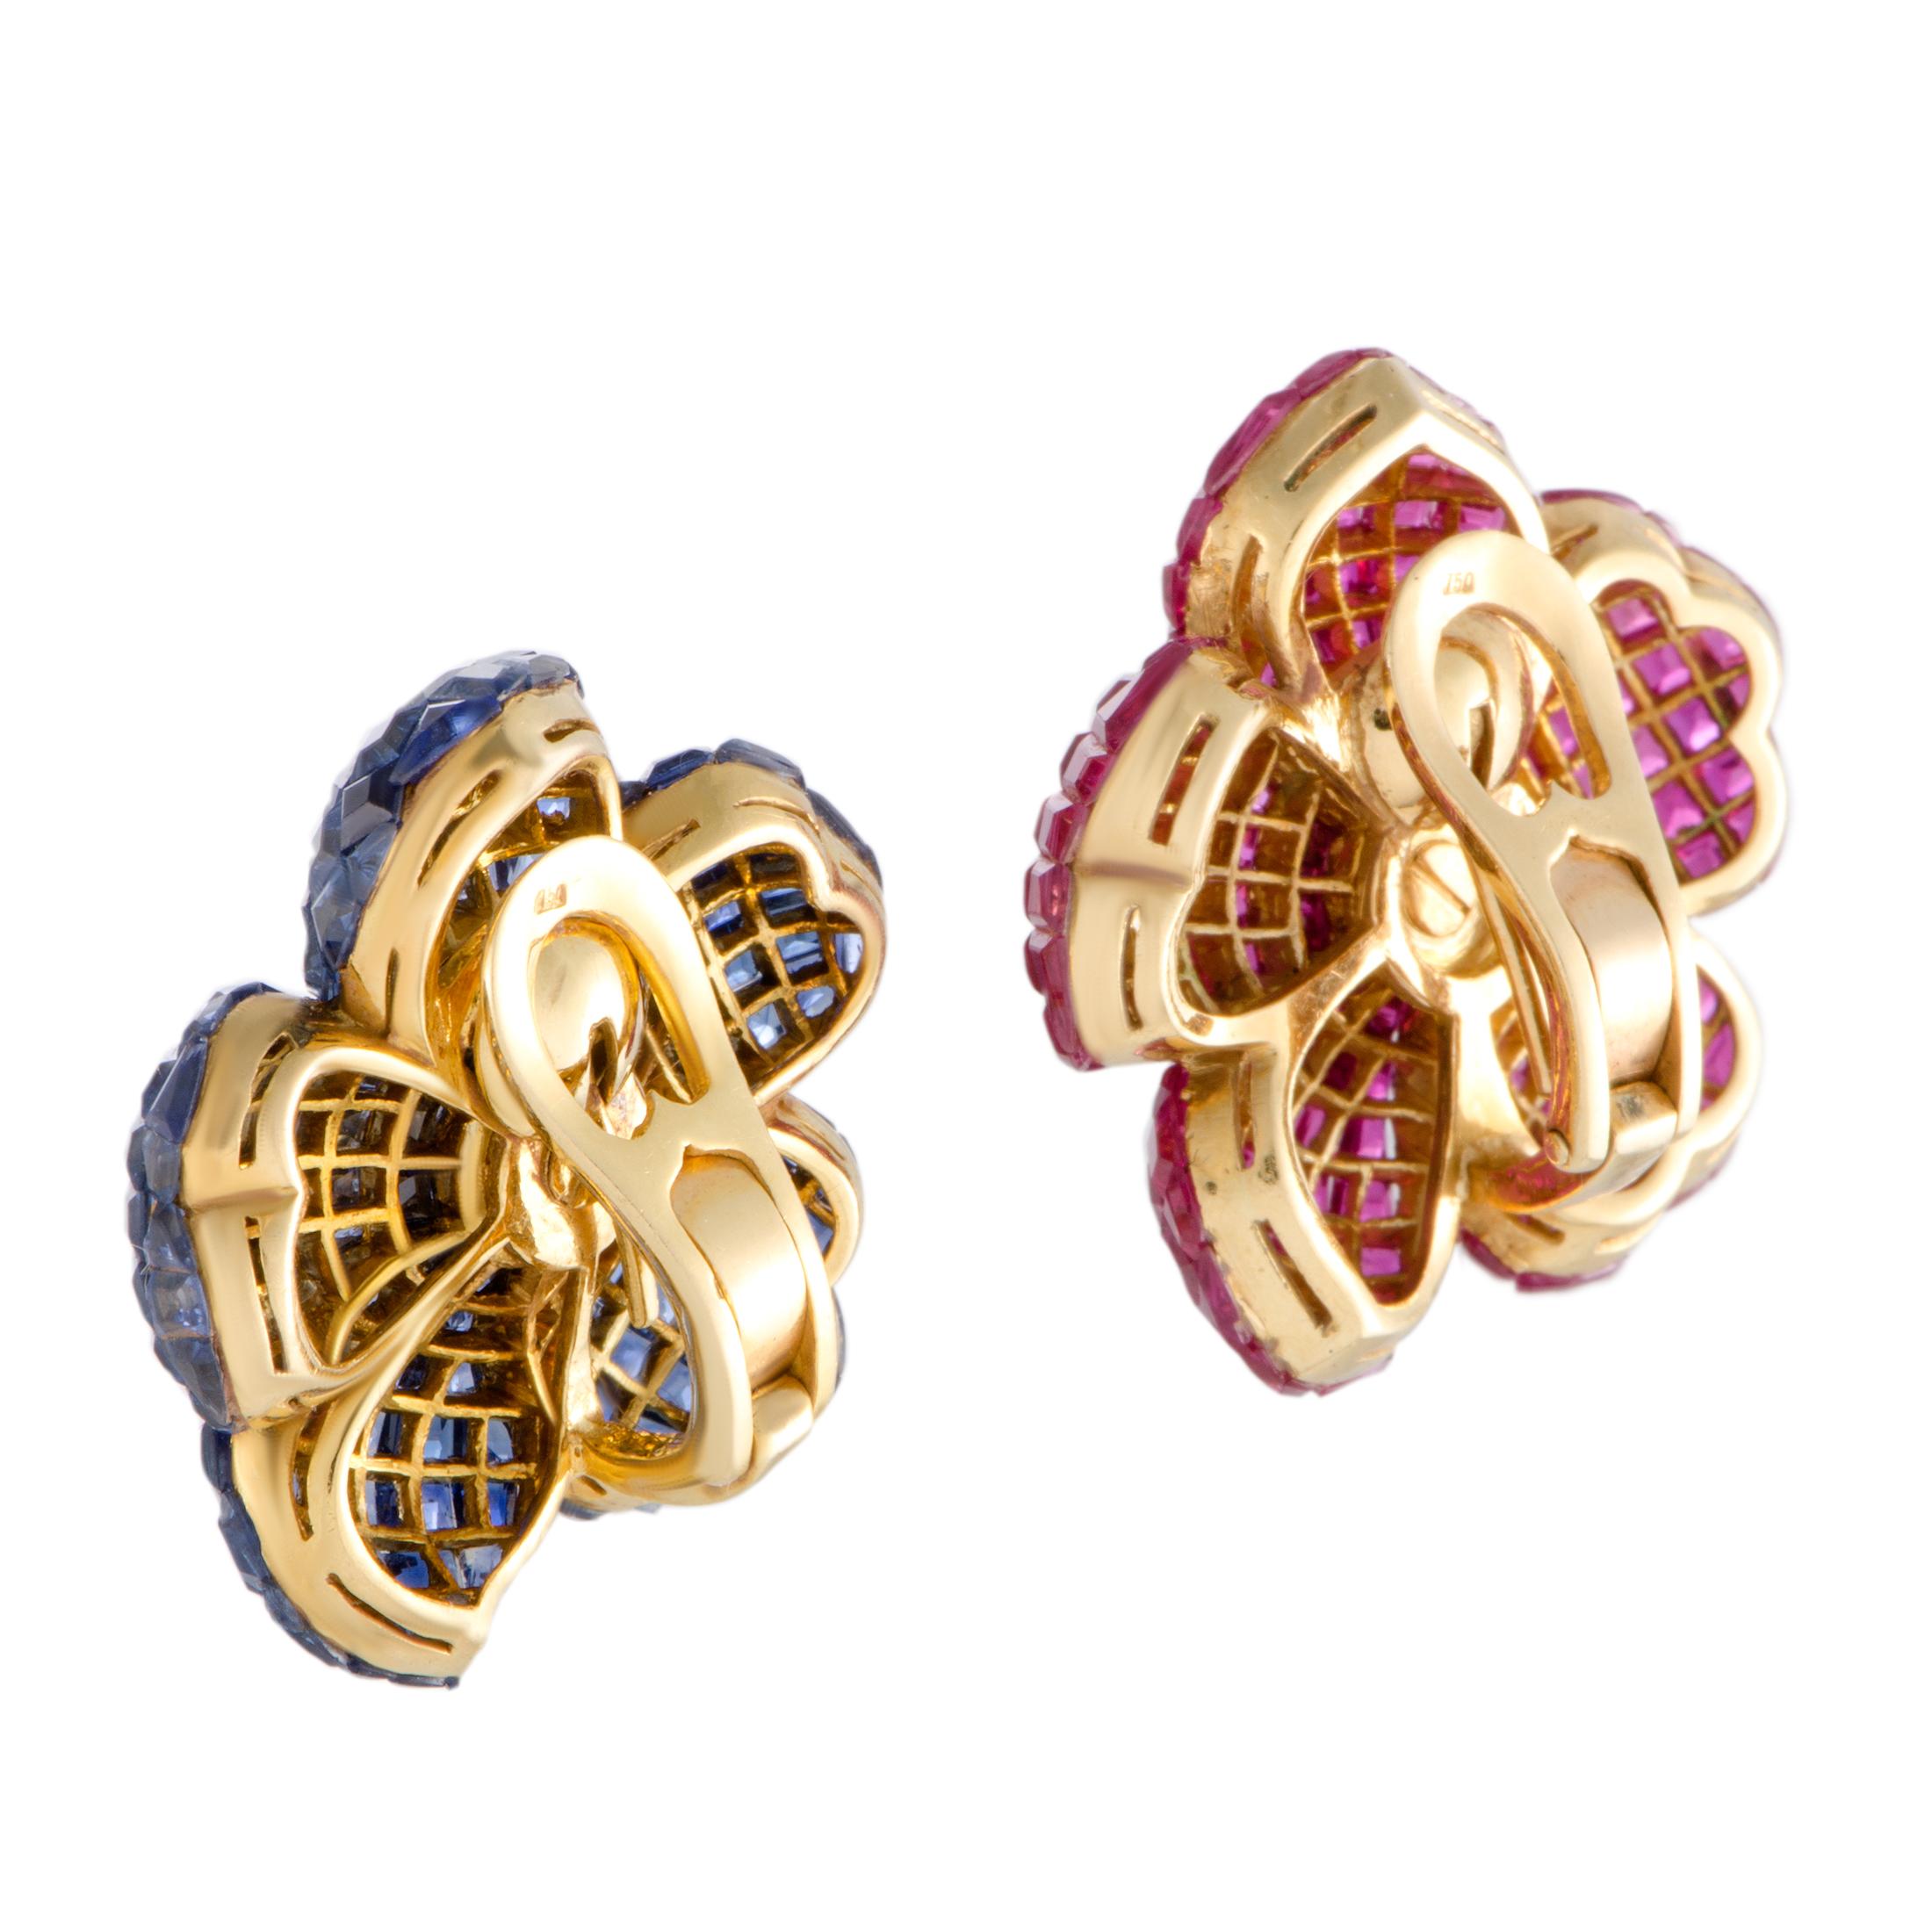 Add a compellingly vivacious touch to your ensembles with these lovely earrings that draw inspiration from the ever-alluring beauty of flowers. The earrings are exquisitely made of luxurious 18K yellow gold and the pair is splendidly decorated with